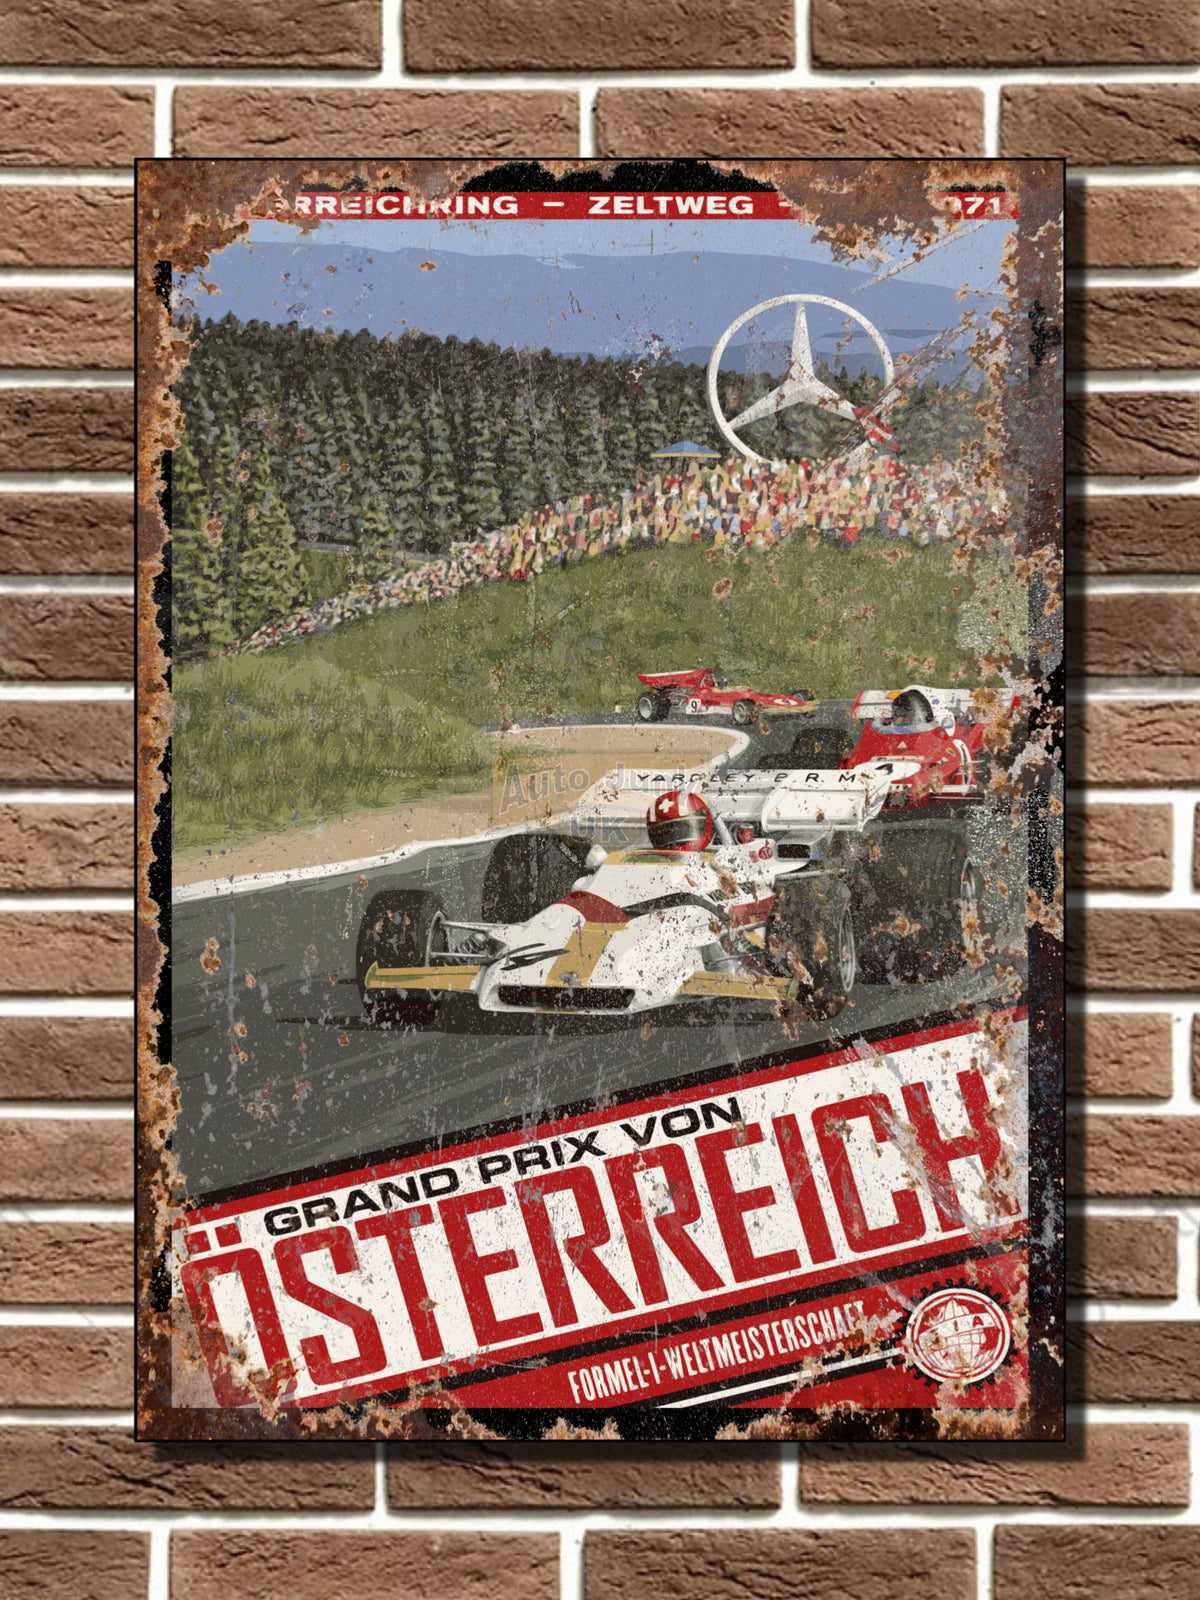 Osterreichring Grand Prix Metal Sign